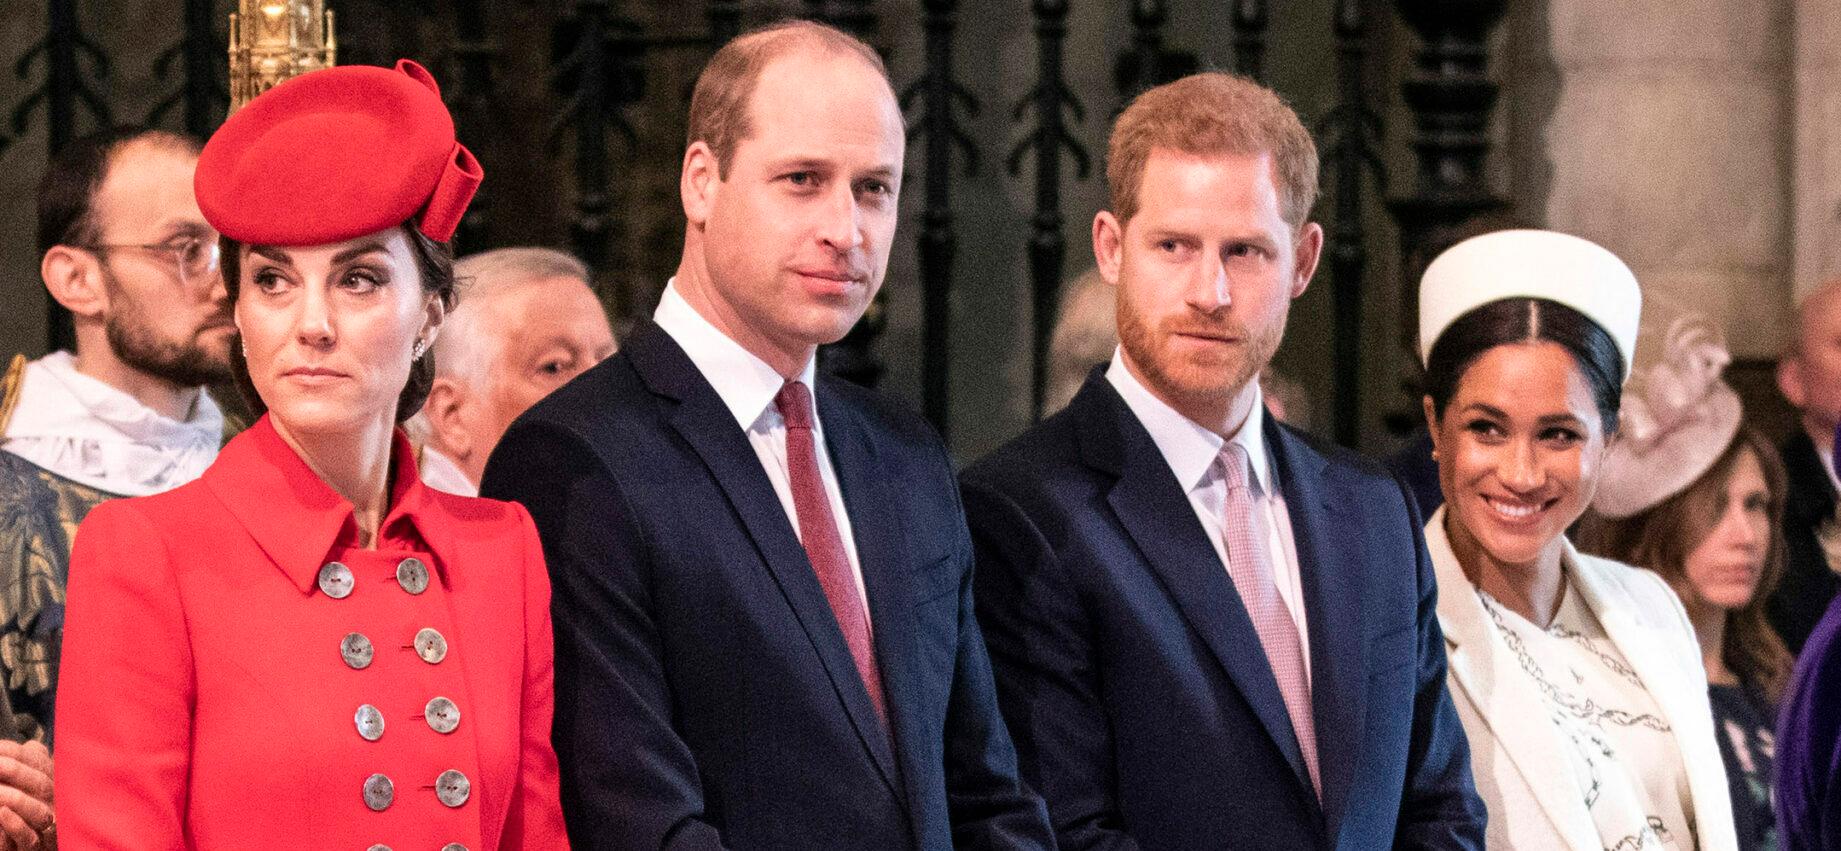 Prince Harry Snubbed By Royal Family On His 39th Birthday, After Wife Meghan Got The Same Treatment